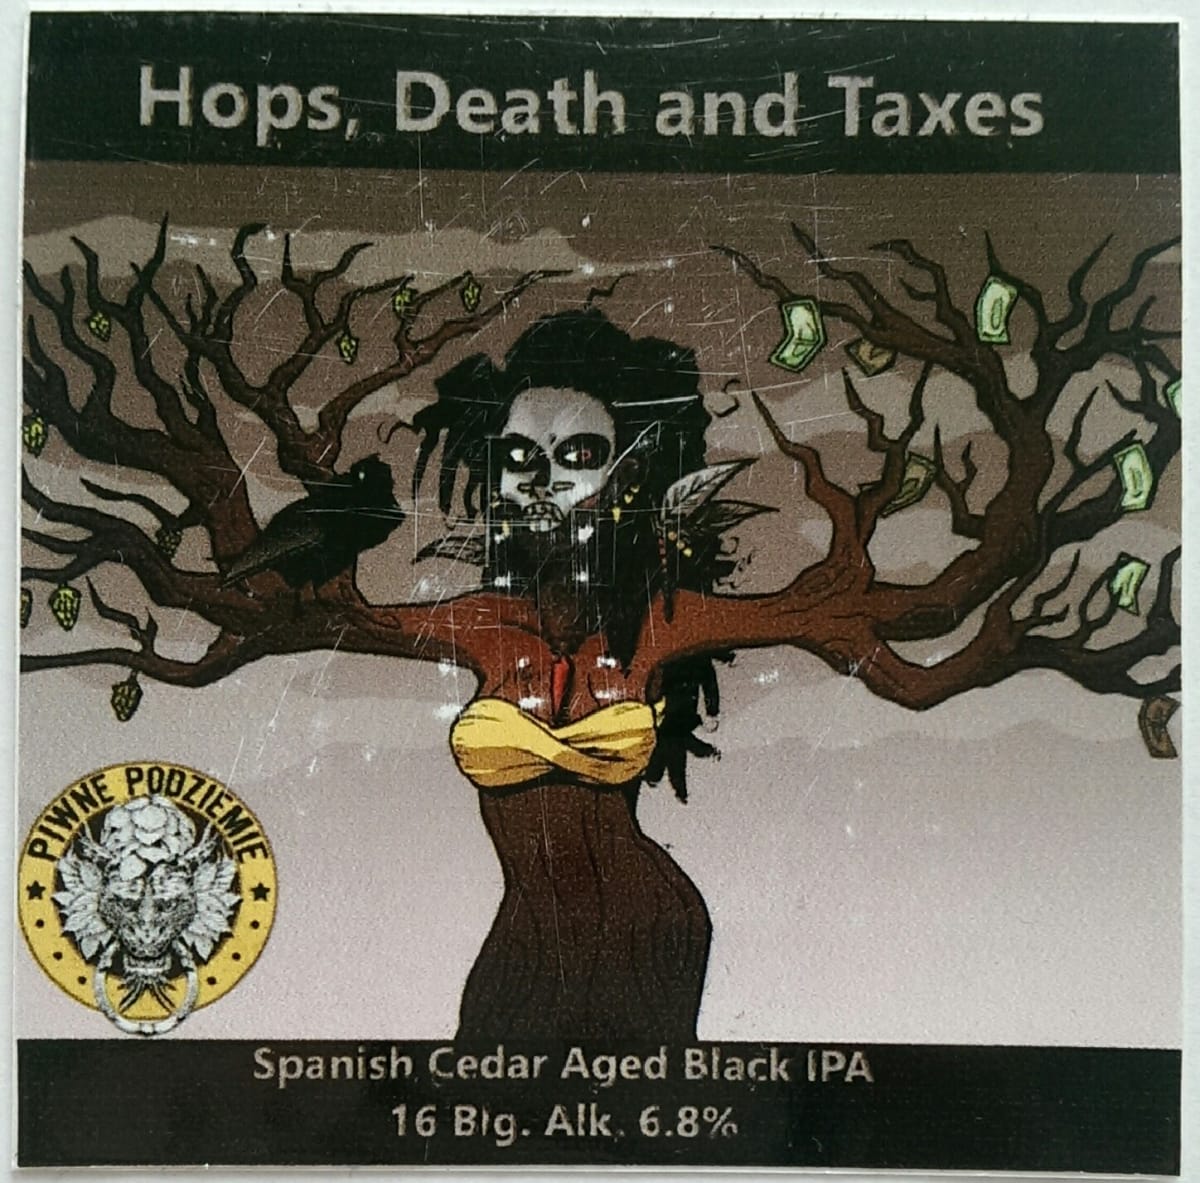 Piwne Podziemie Hops Death and Taxes Etk. A